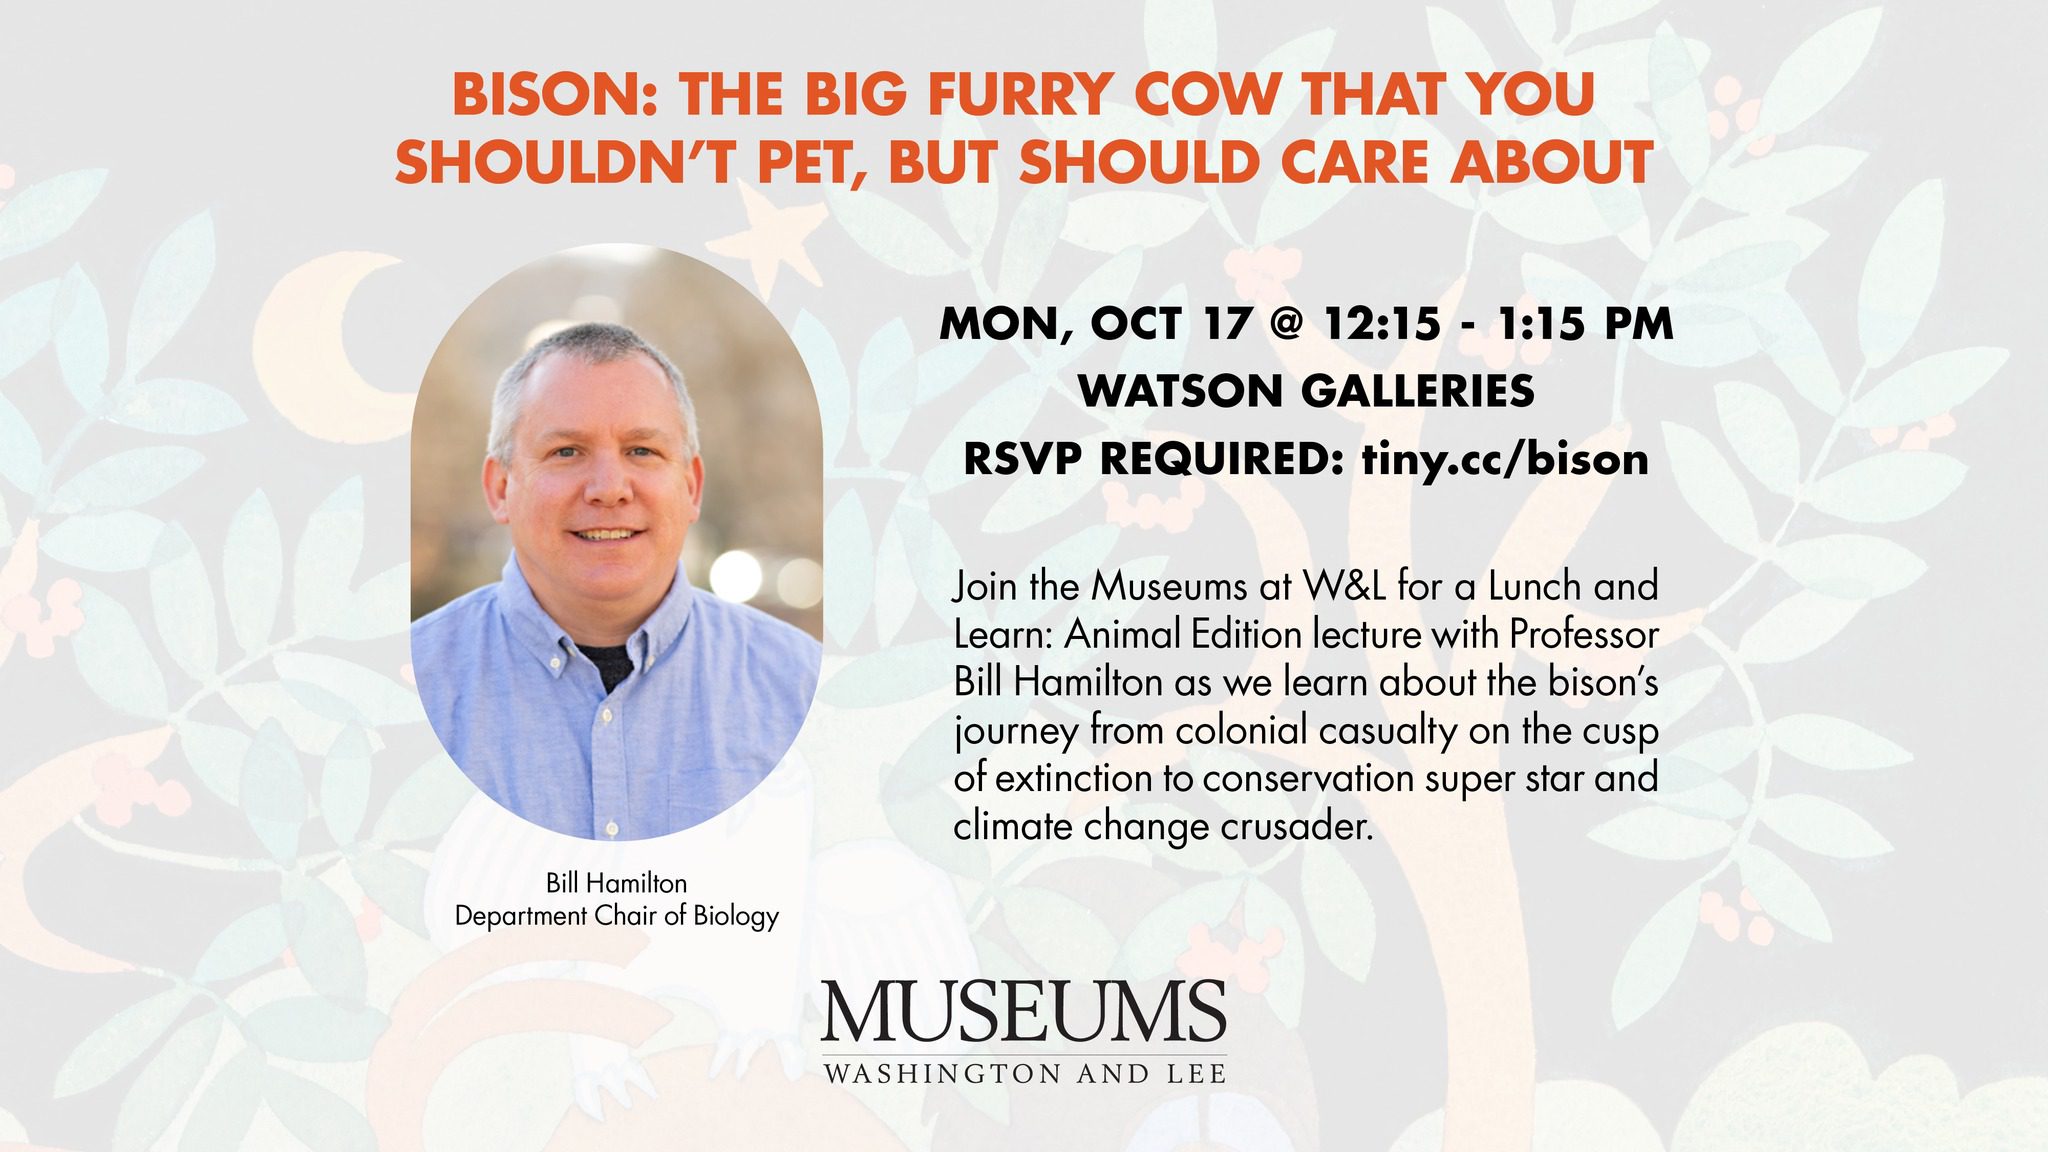 Lunch & Learn: Bison: The Big Furry Cow You Shouldn’t Pet, But Should Care About